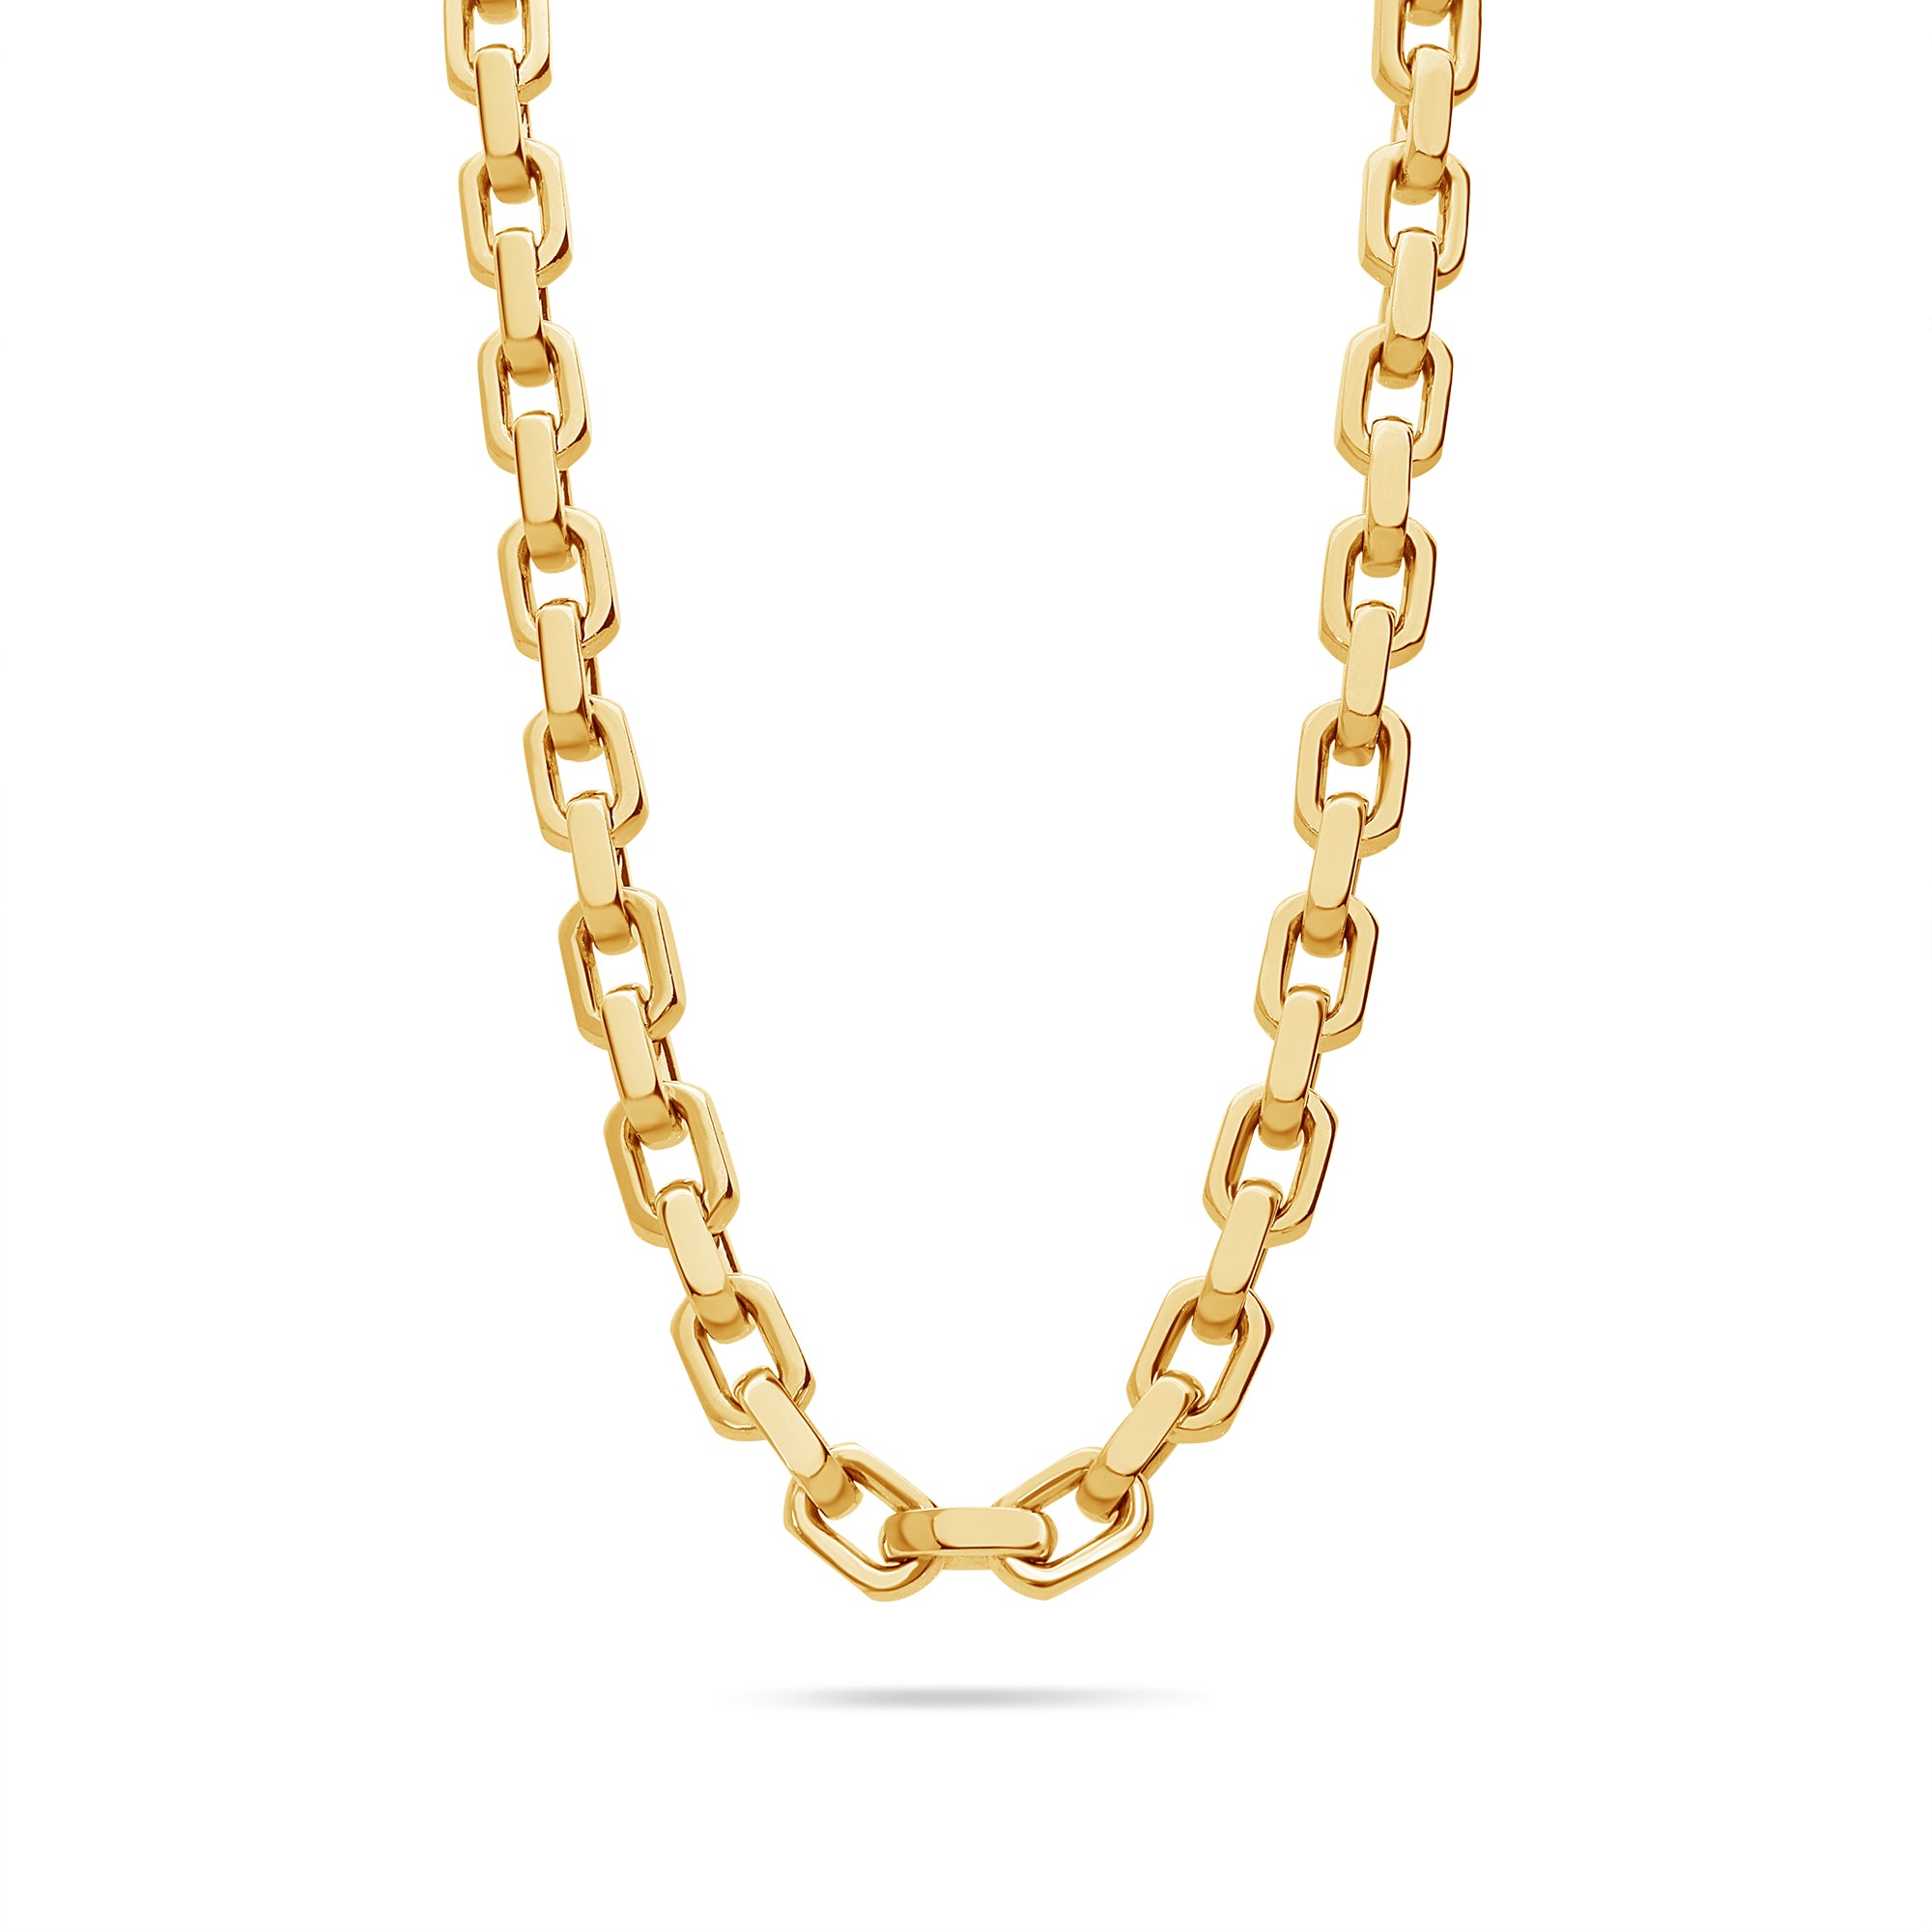 Gold Odin Link Chain (7mm) - If & Co. 18K White Gold / 26 inch